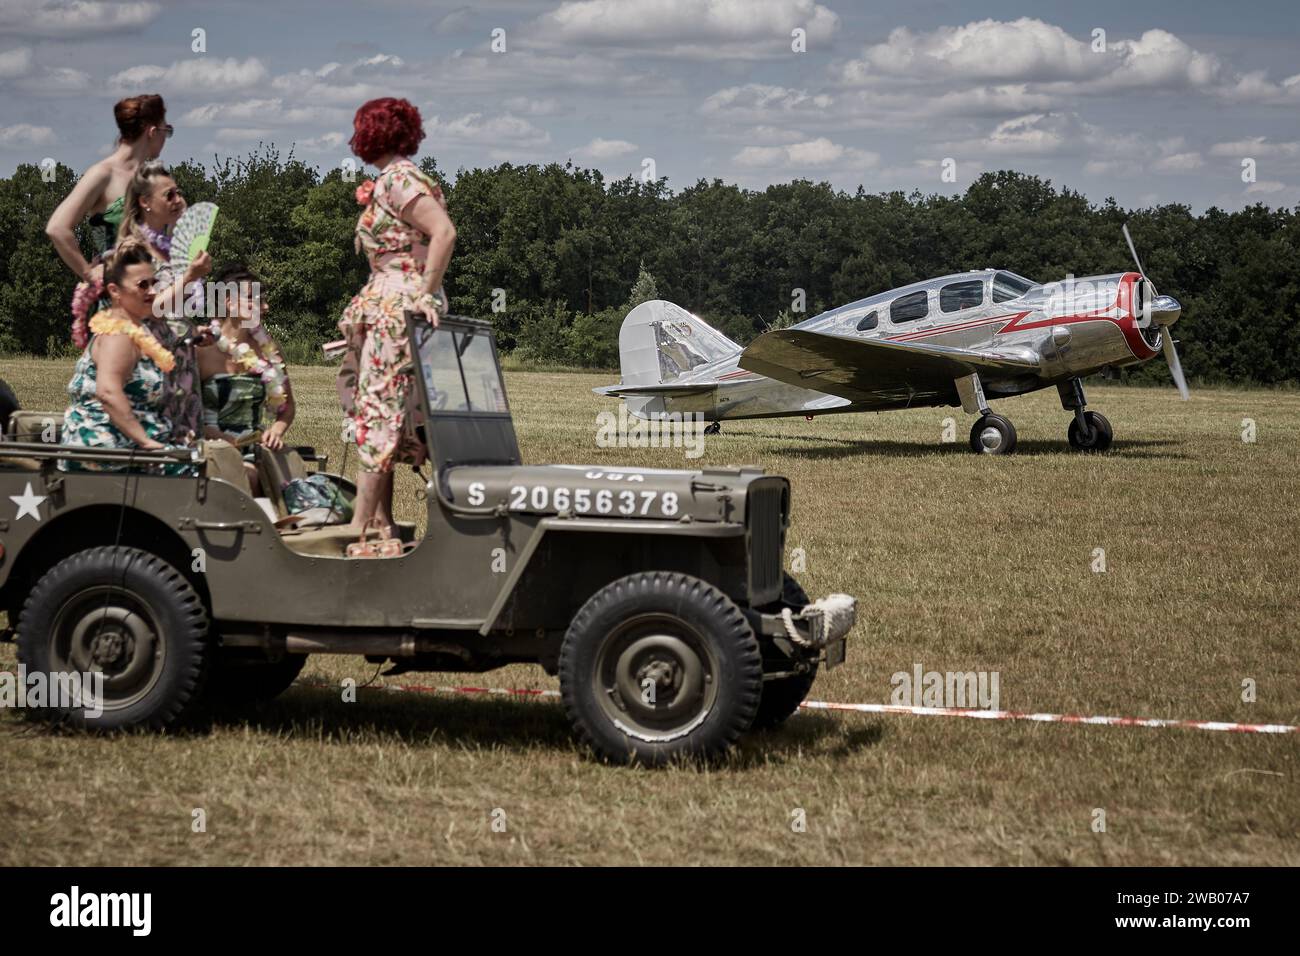 Pin-ups standing on a jeep Willys looking at Spartan Executive 7 W ready to take-off Stock Photo